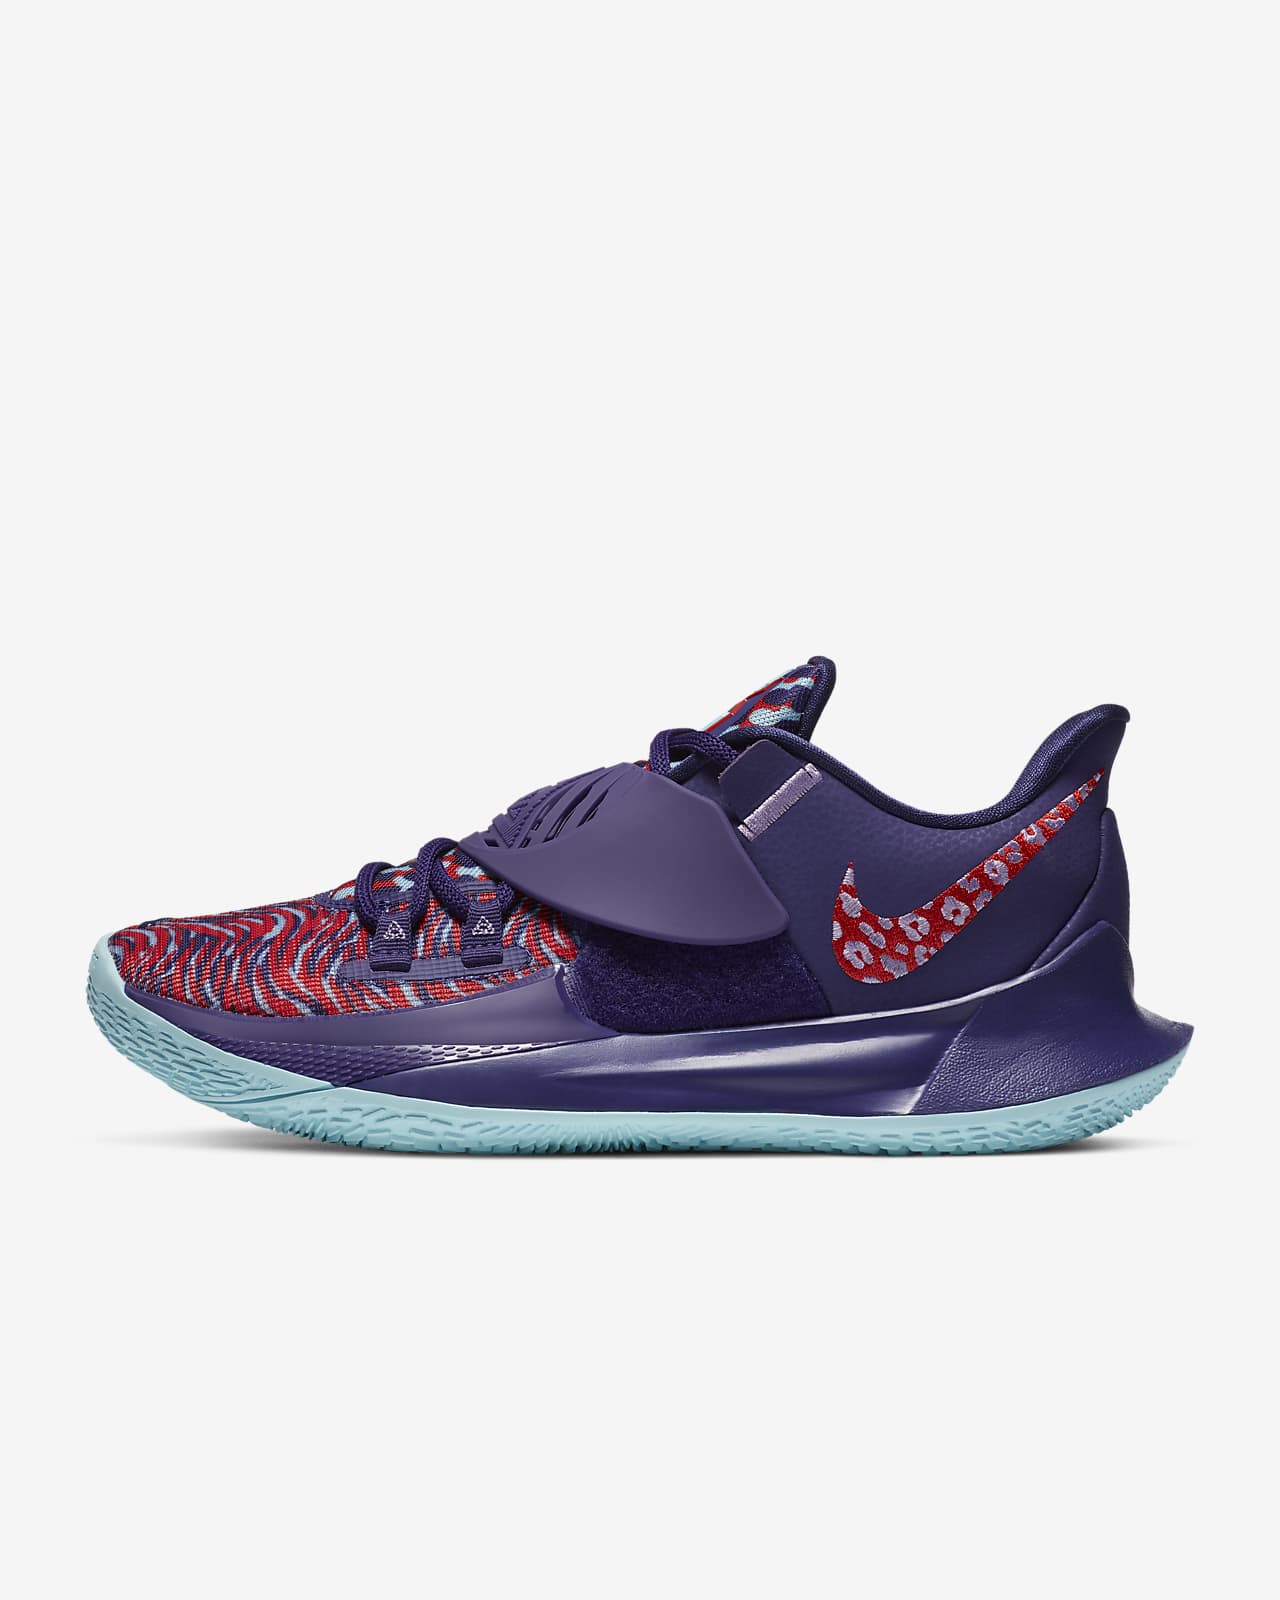 kyrie irving 4 low